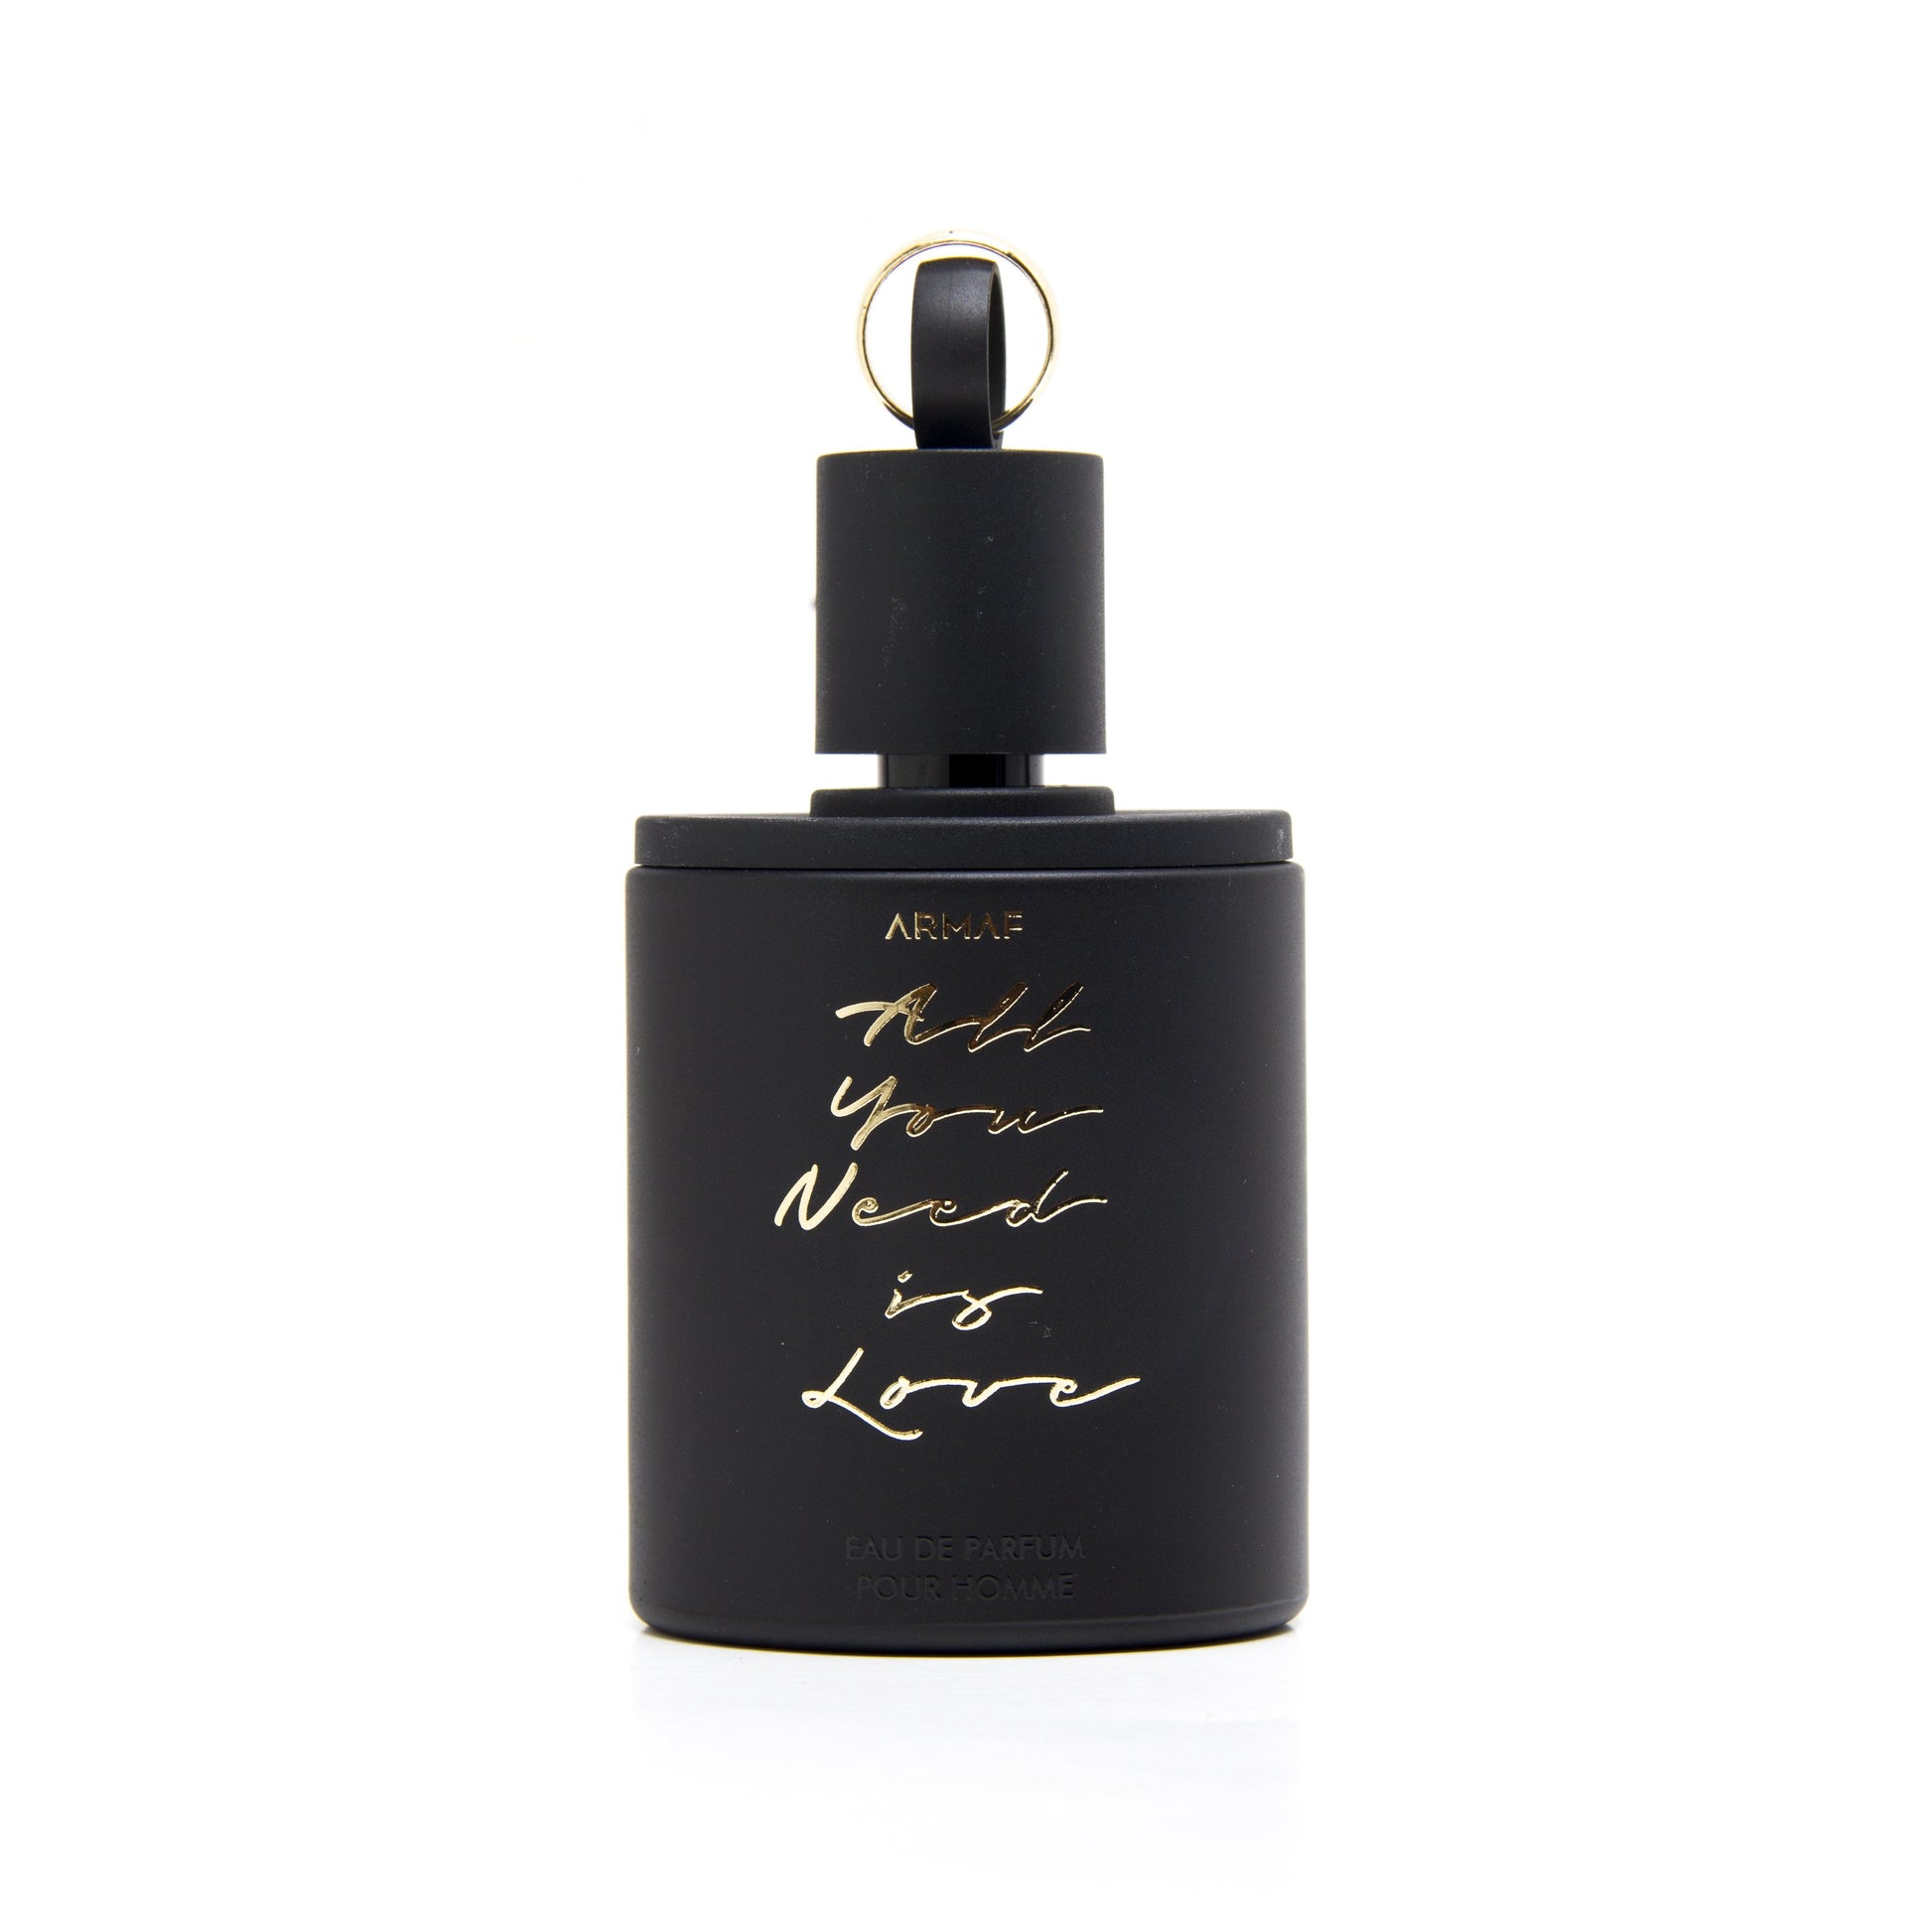 All You Need Is Love Eau de Parfum Spray for Men, Product image 2